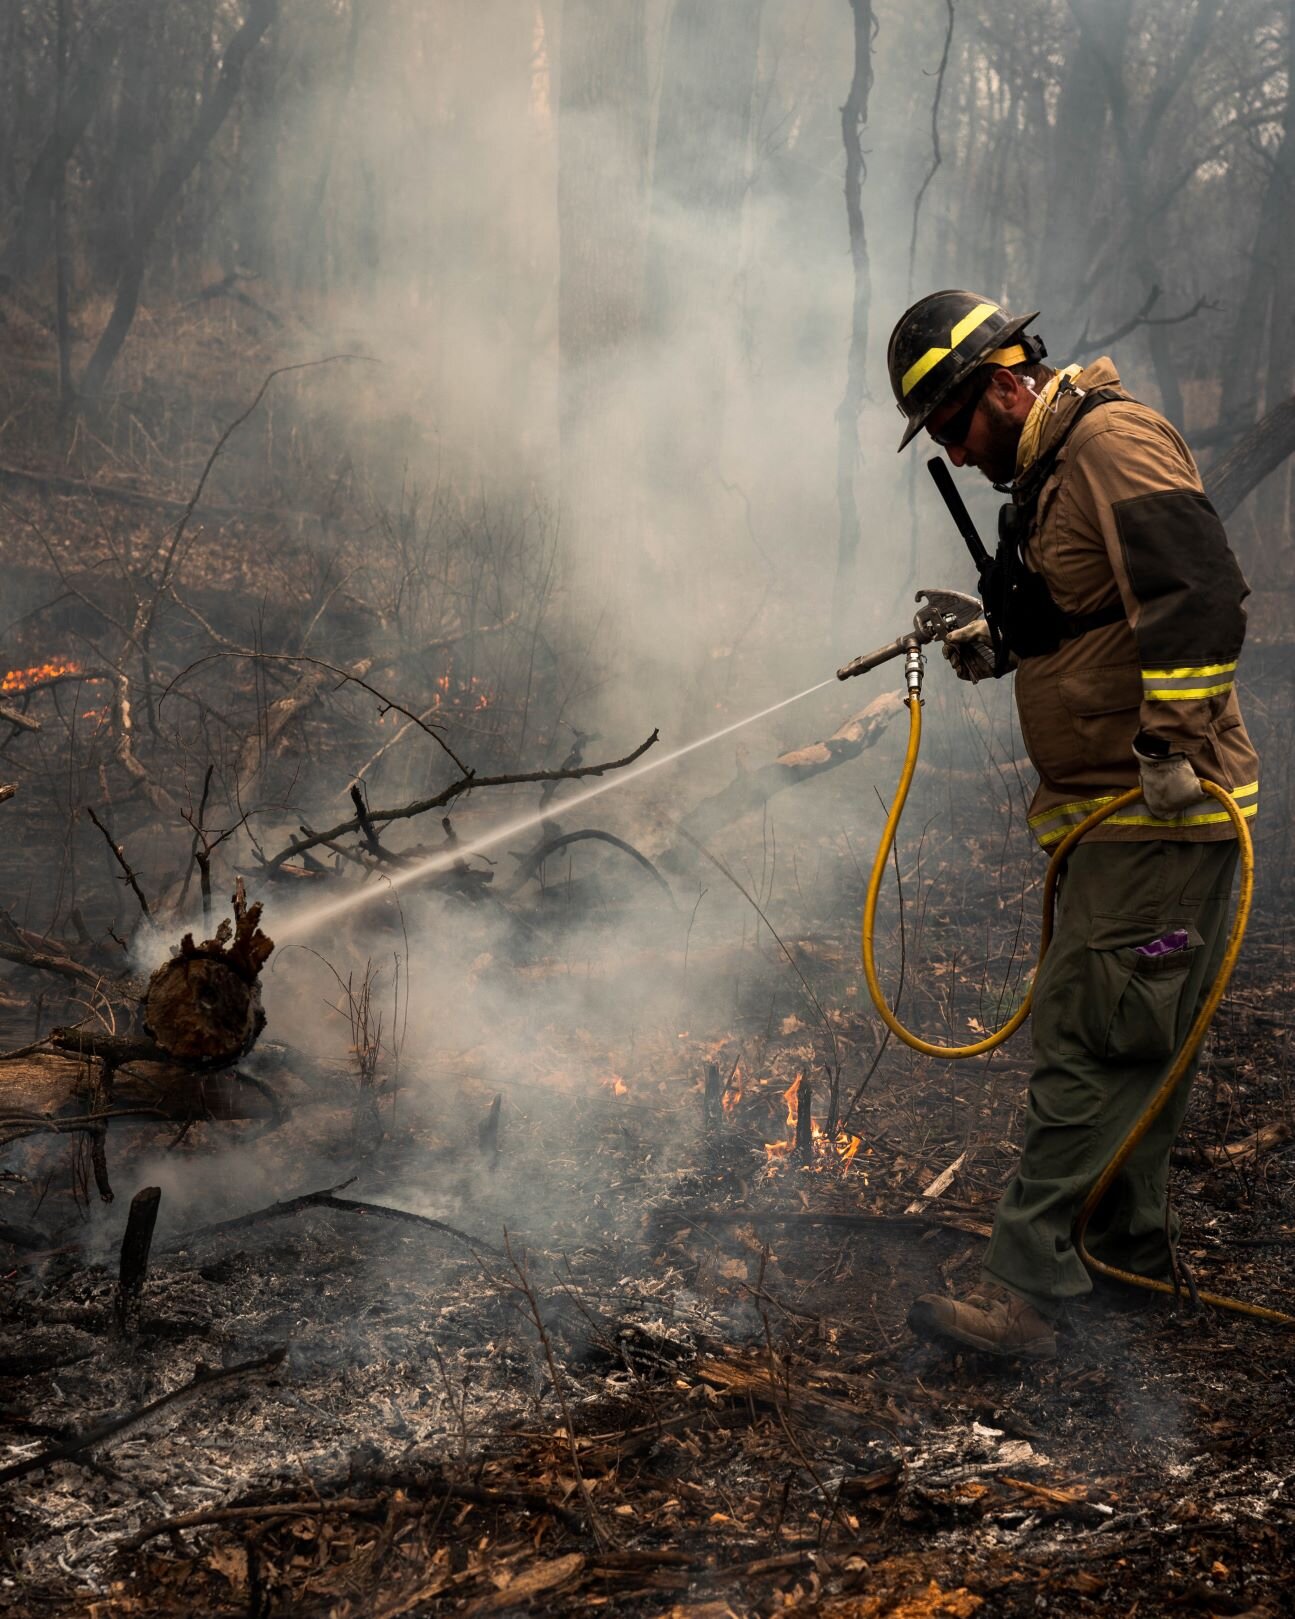 technician using a water hose to put out a burning log